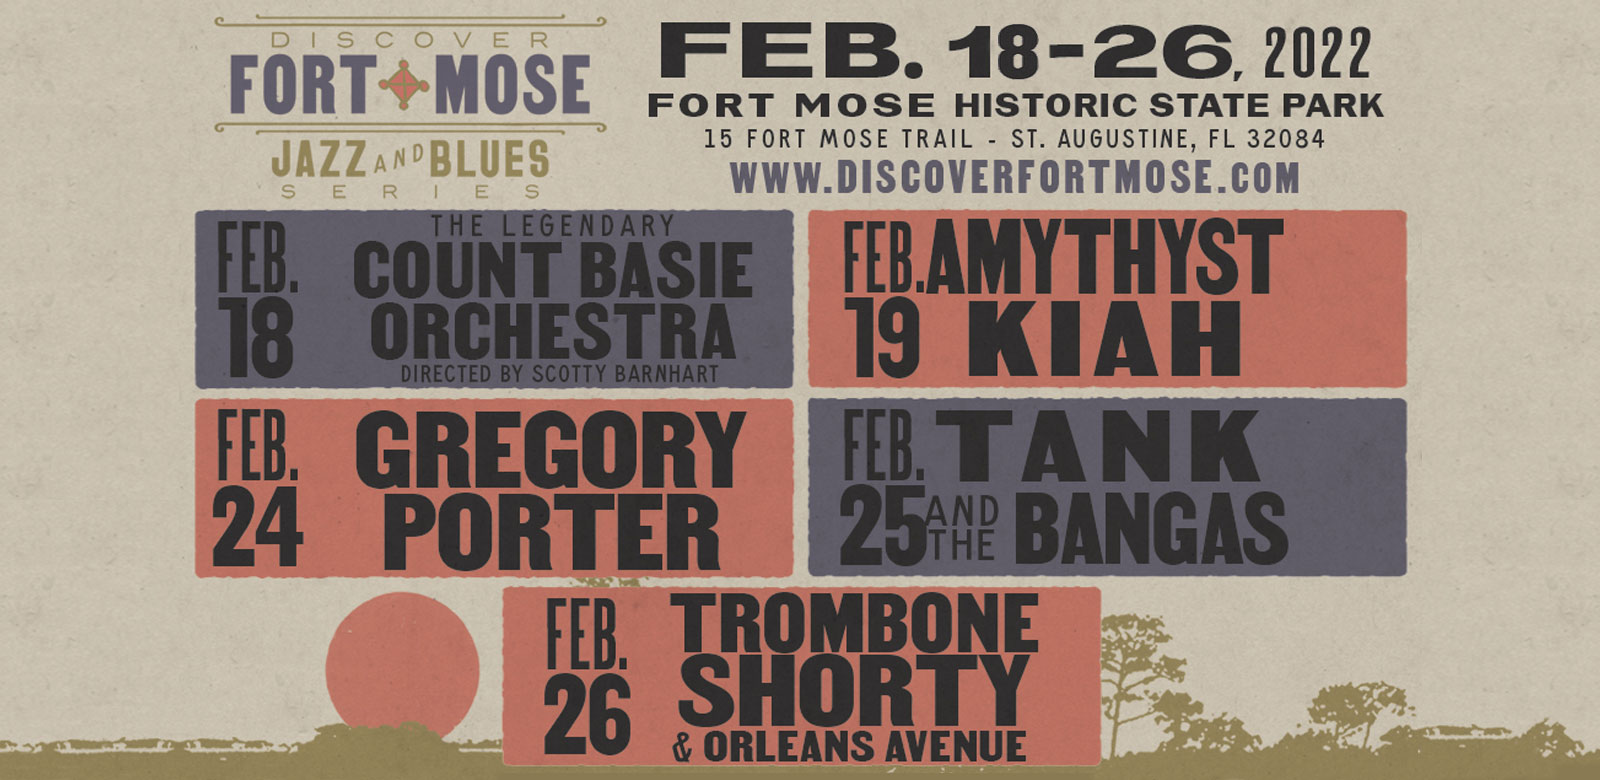 Fort Mose Jazz and Blues Lineup